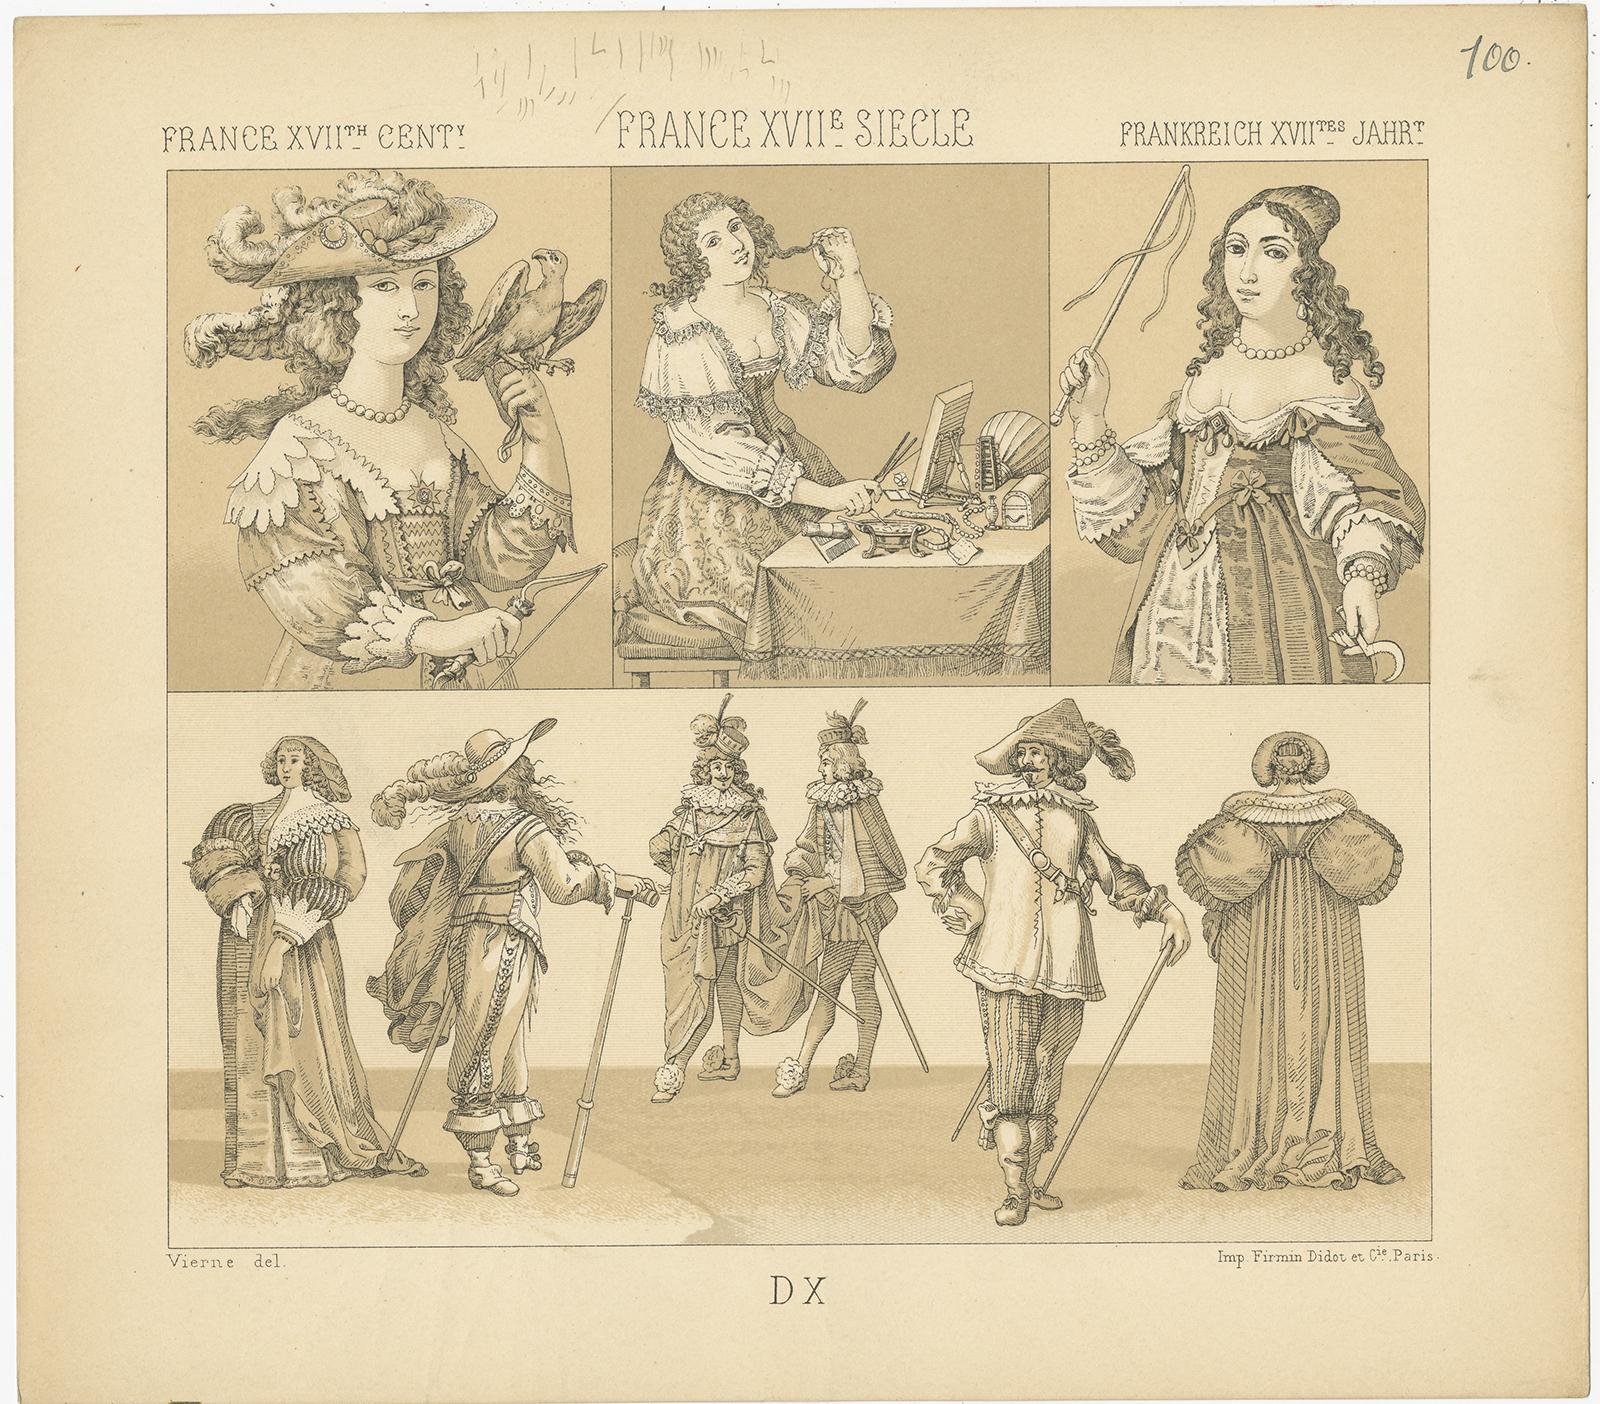 Antique print titled 'France XVIIth Cent - France XVIIe, Siecle - Frankreich XVIItes Jahr'. Chromolithograph of French 17th century costumes. This print originates from 'Le Costume Historique' by M.A. Racinet. Published circa 1880.